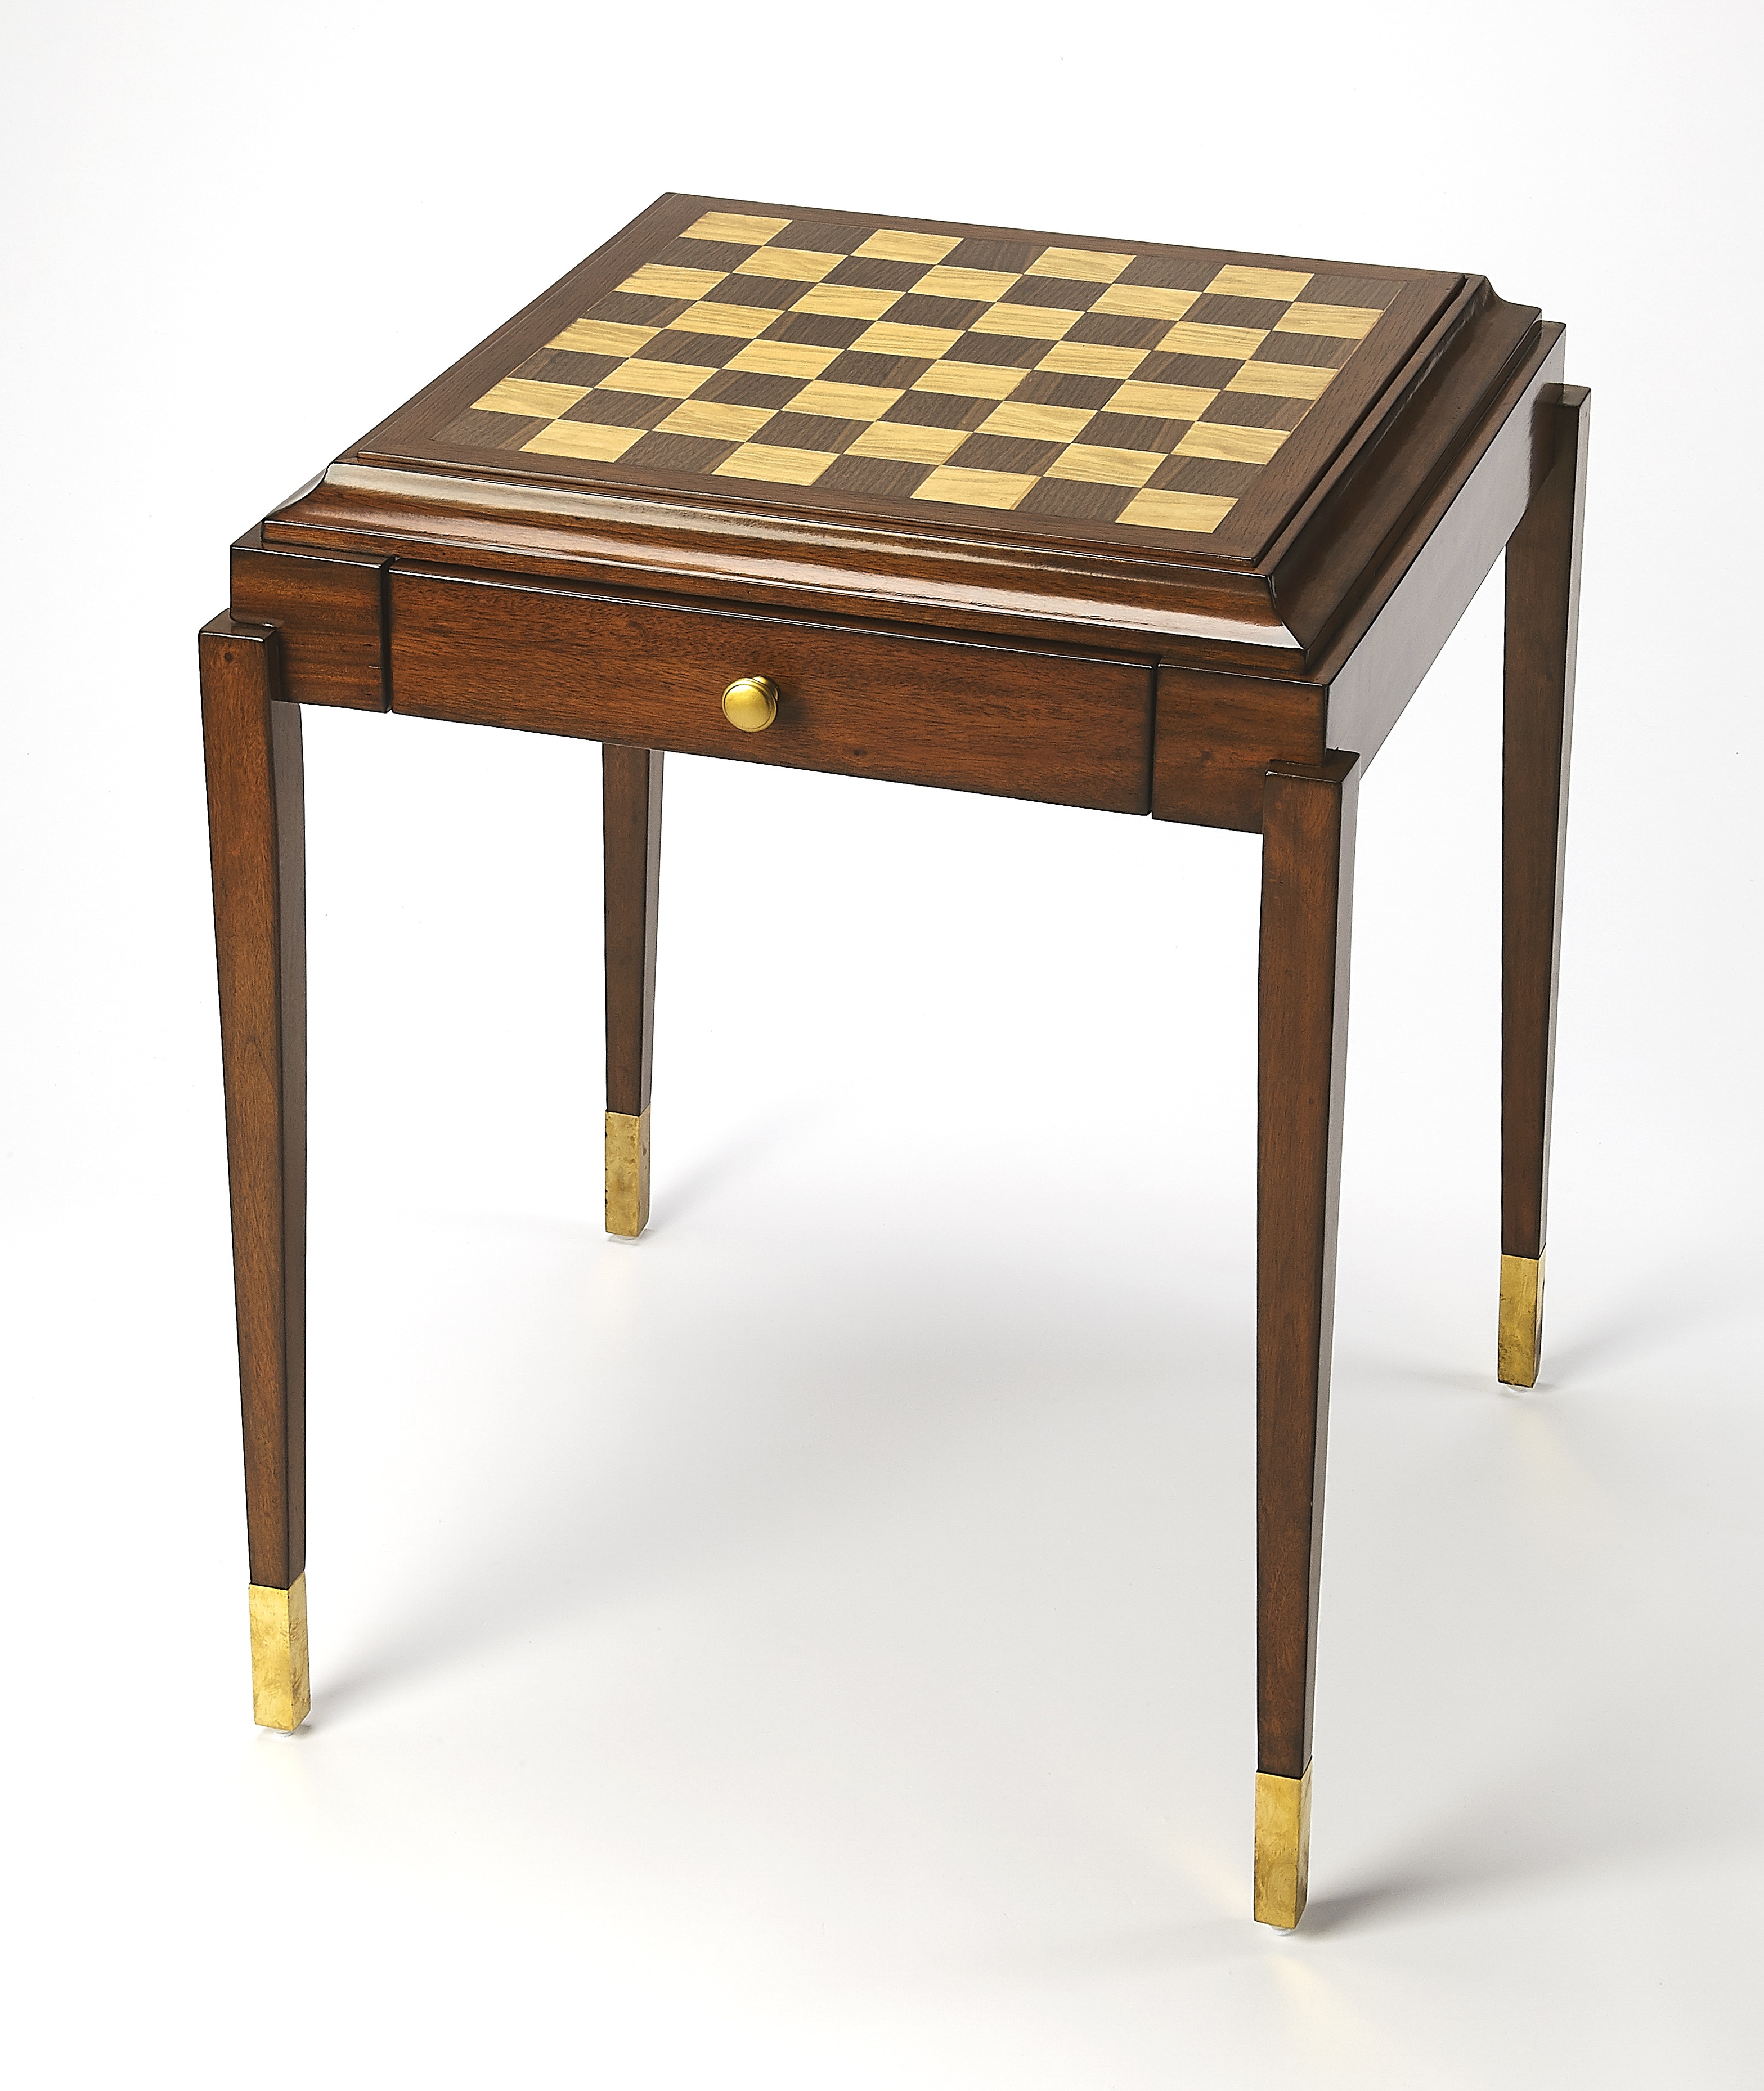 4461011 Specialty Company Game Specialty - - Chicago, Butler Adrian IL Butler Room Table Living